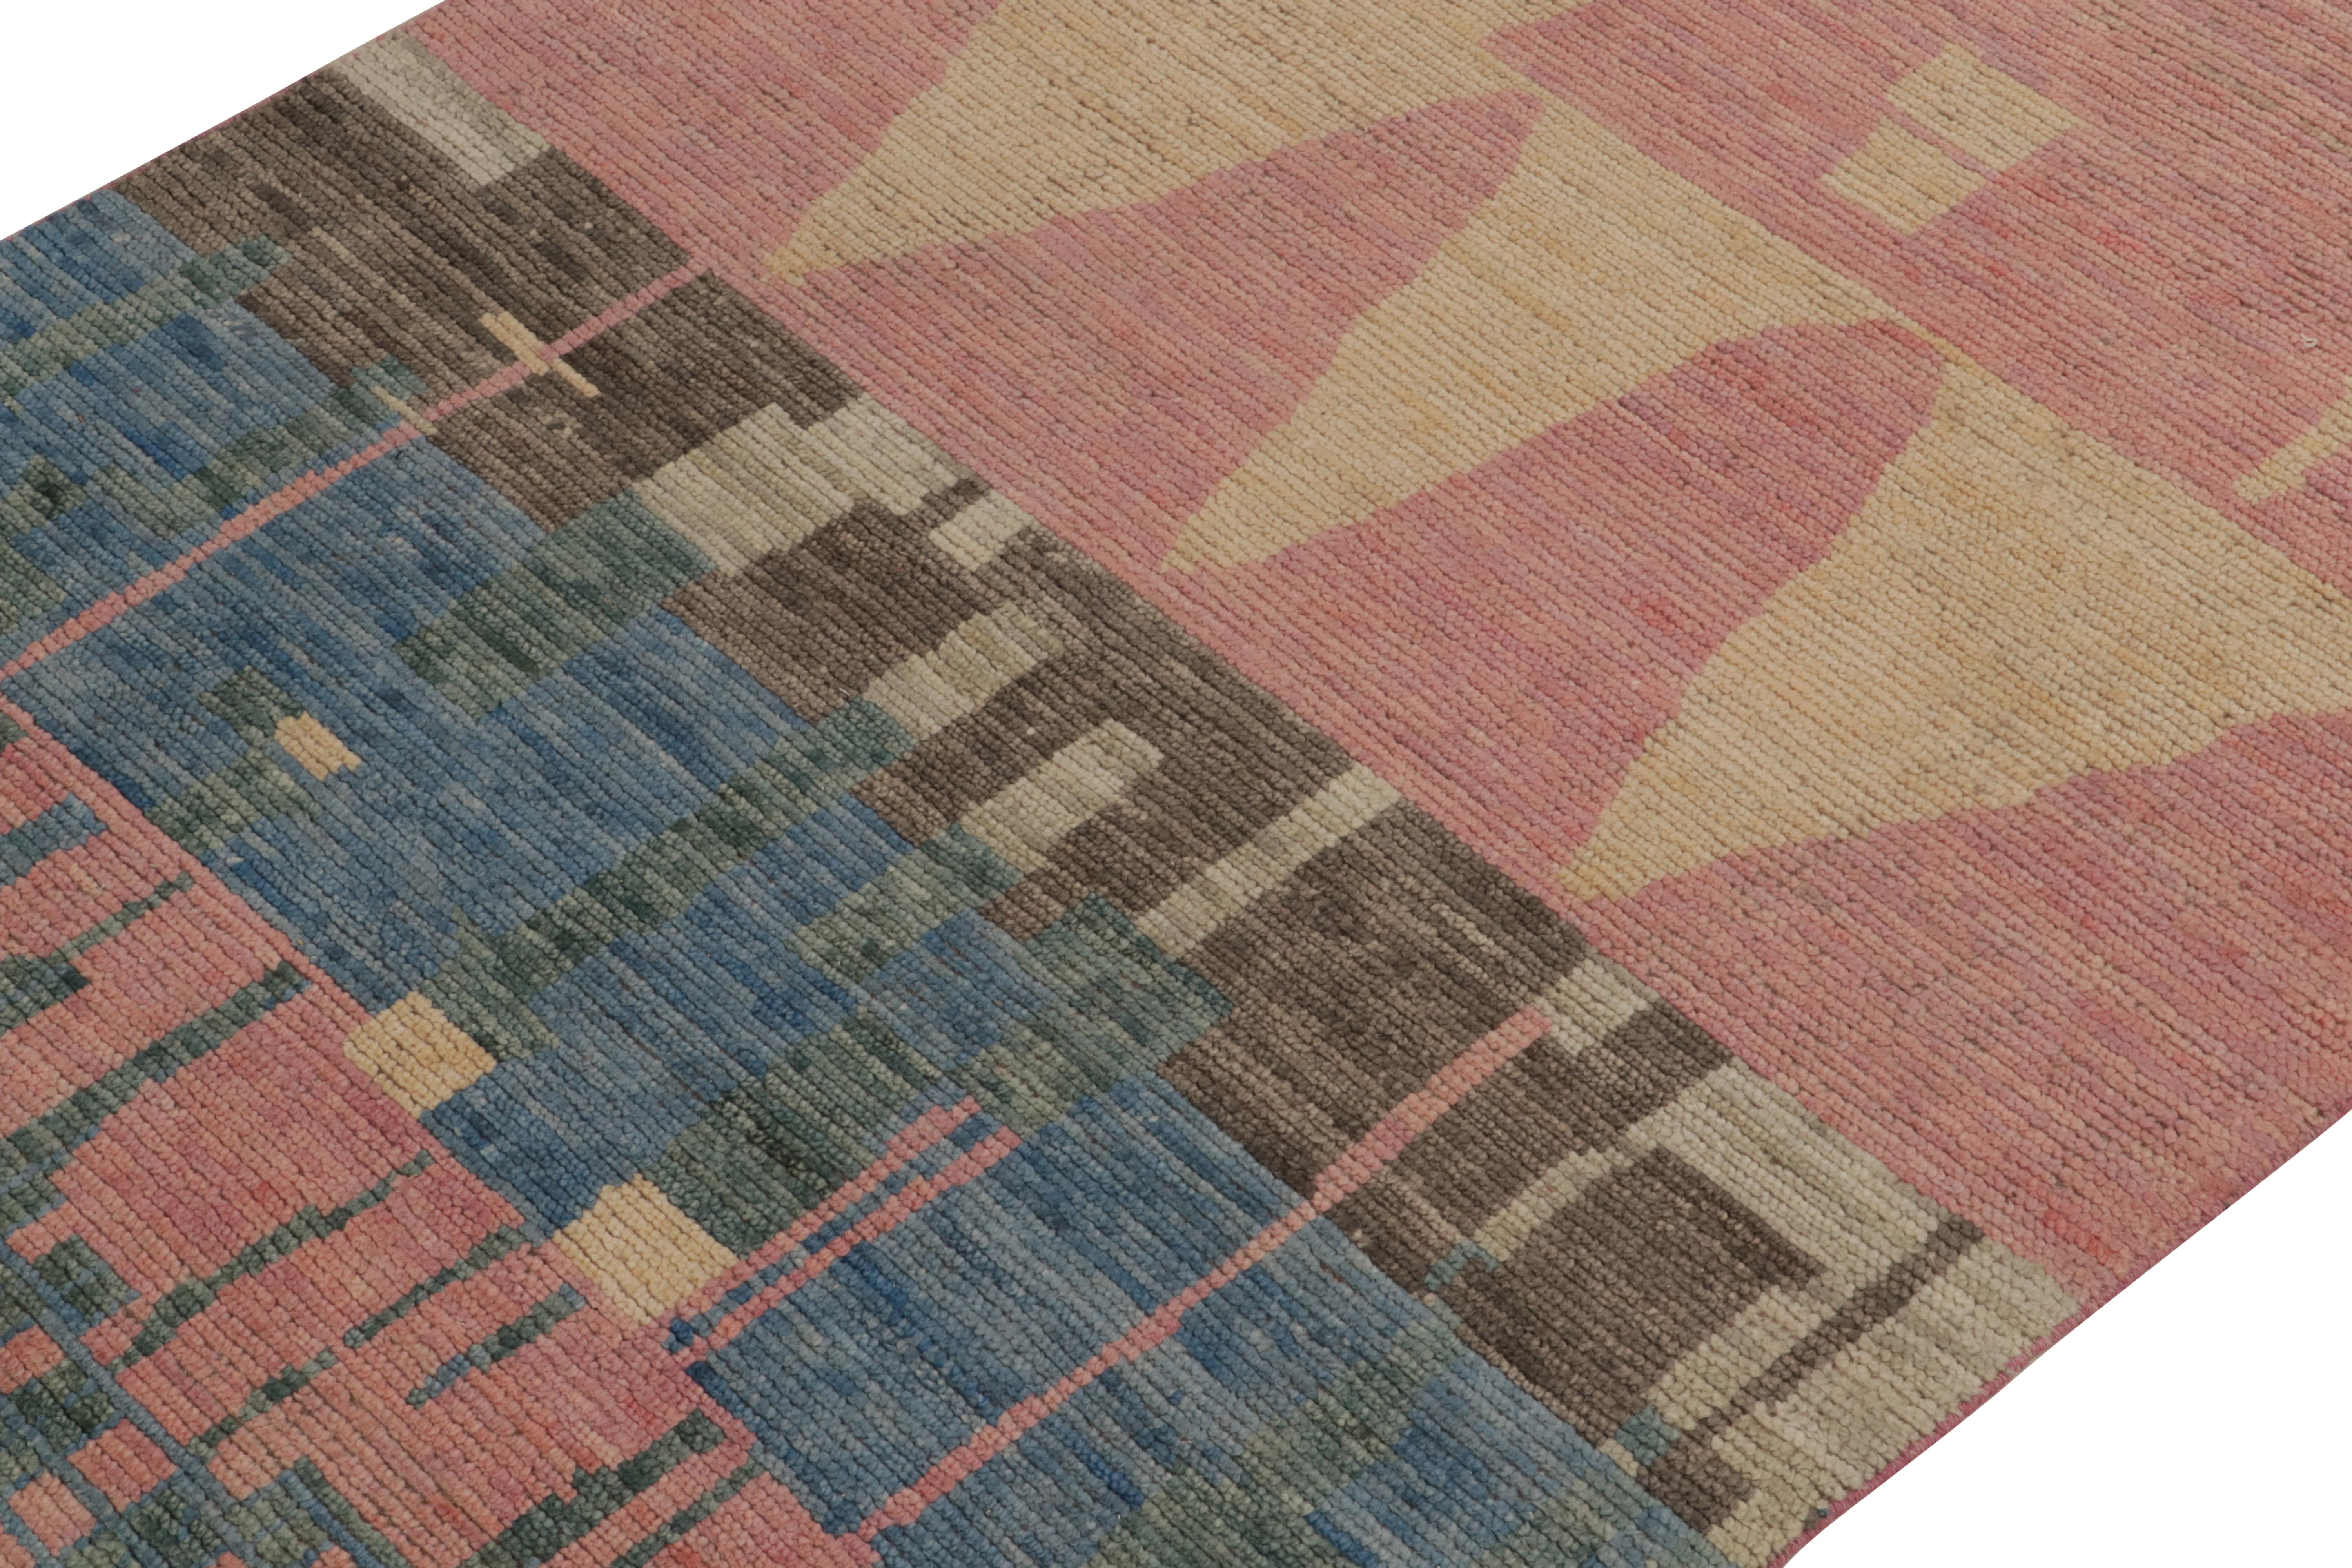 Indian Rug & Kilim’s Moroccan Style Rug in Pink, Blue & Beige-Brown Geometric Patterns For Sale